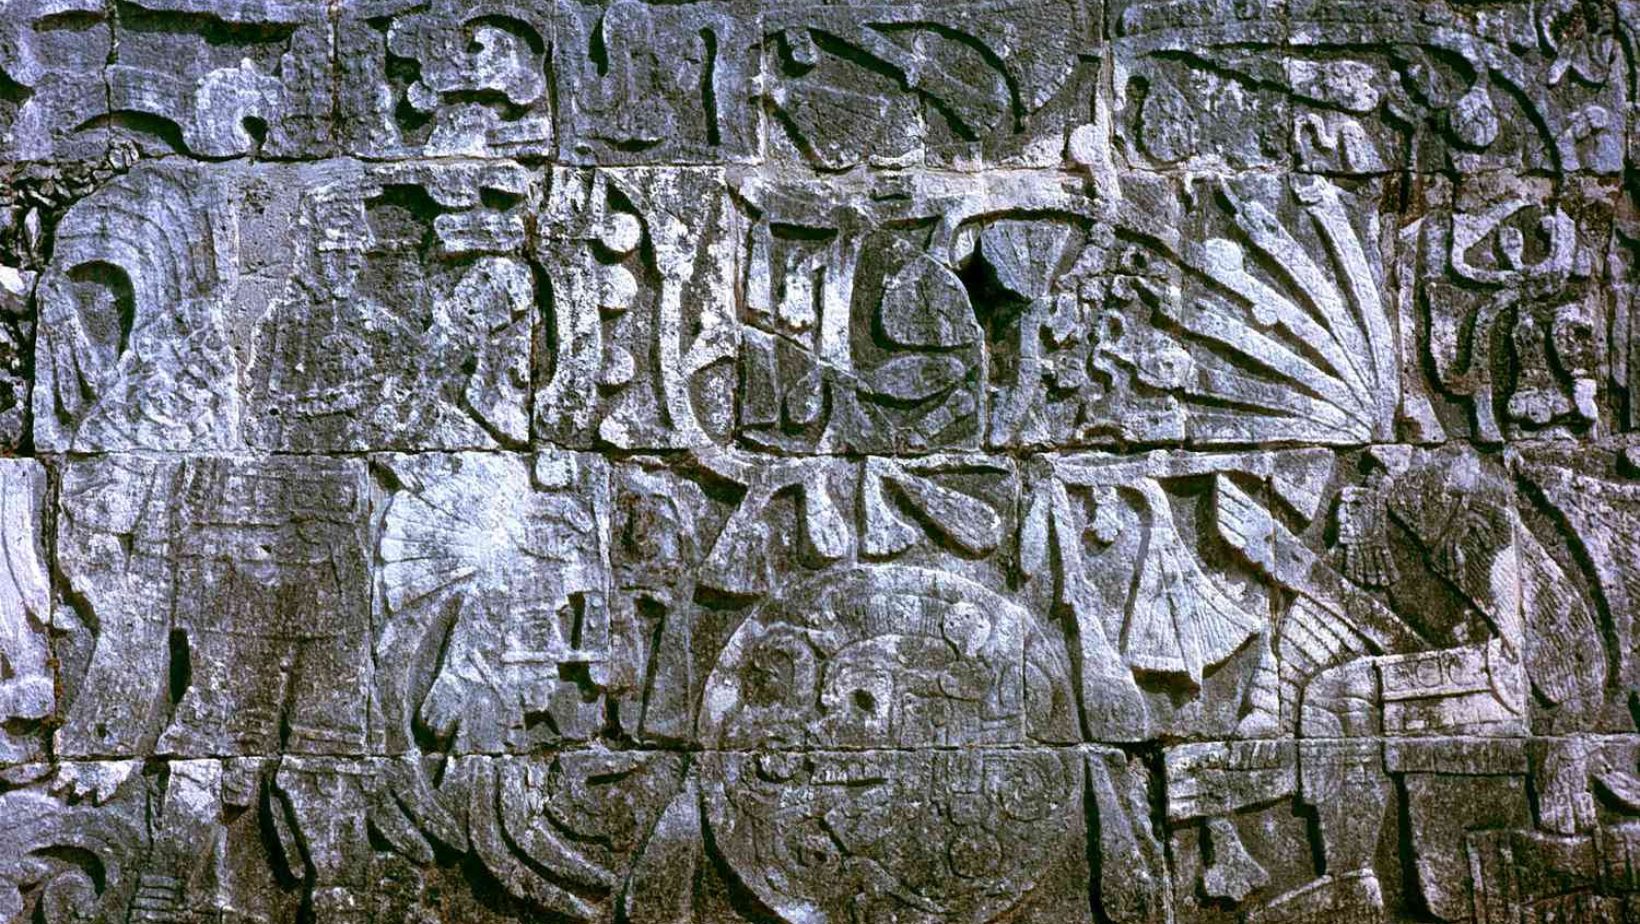 main features of Mayan art and sculpture